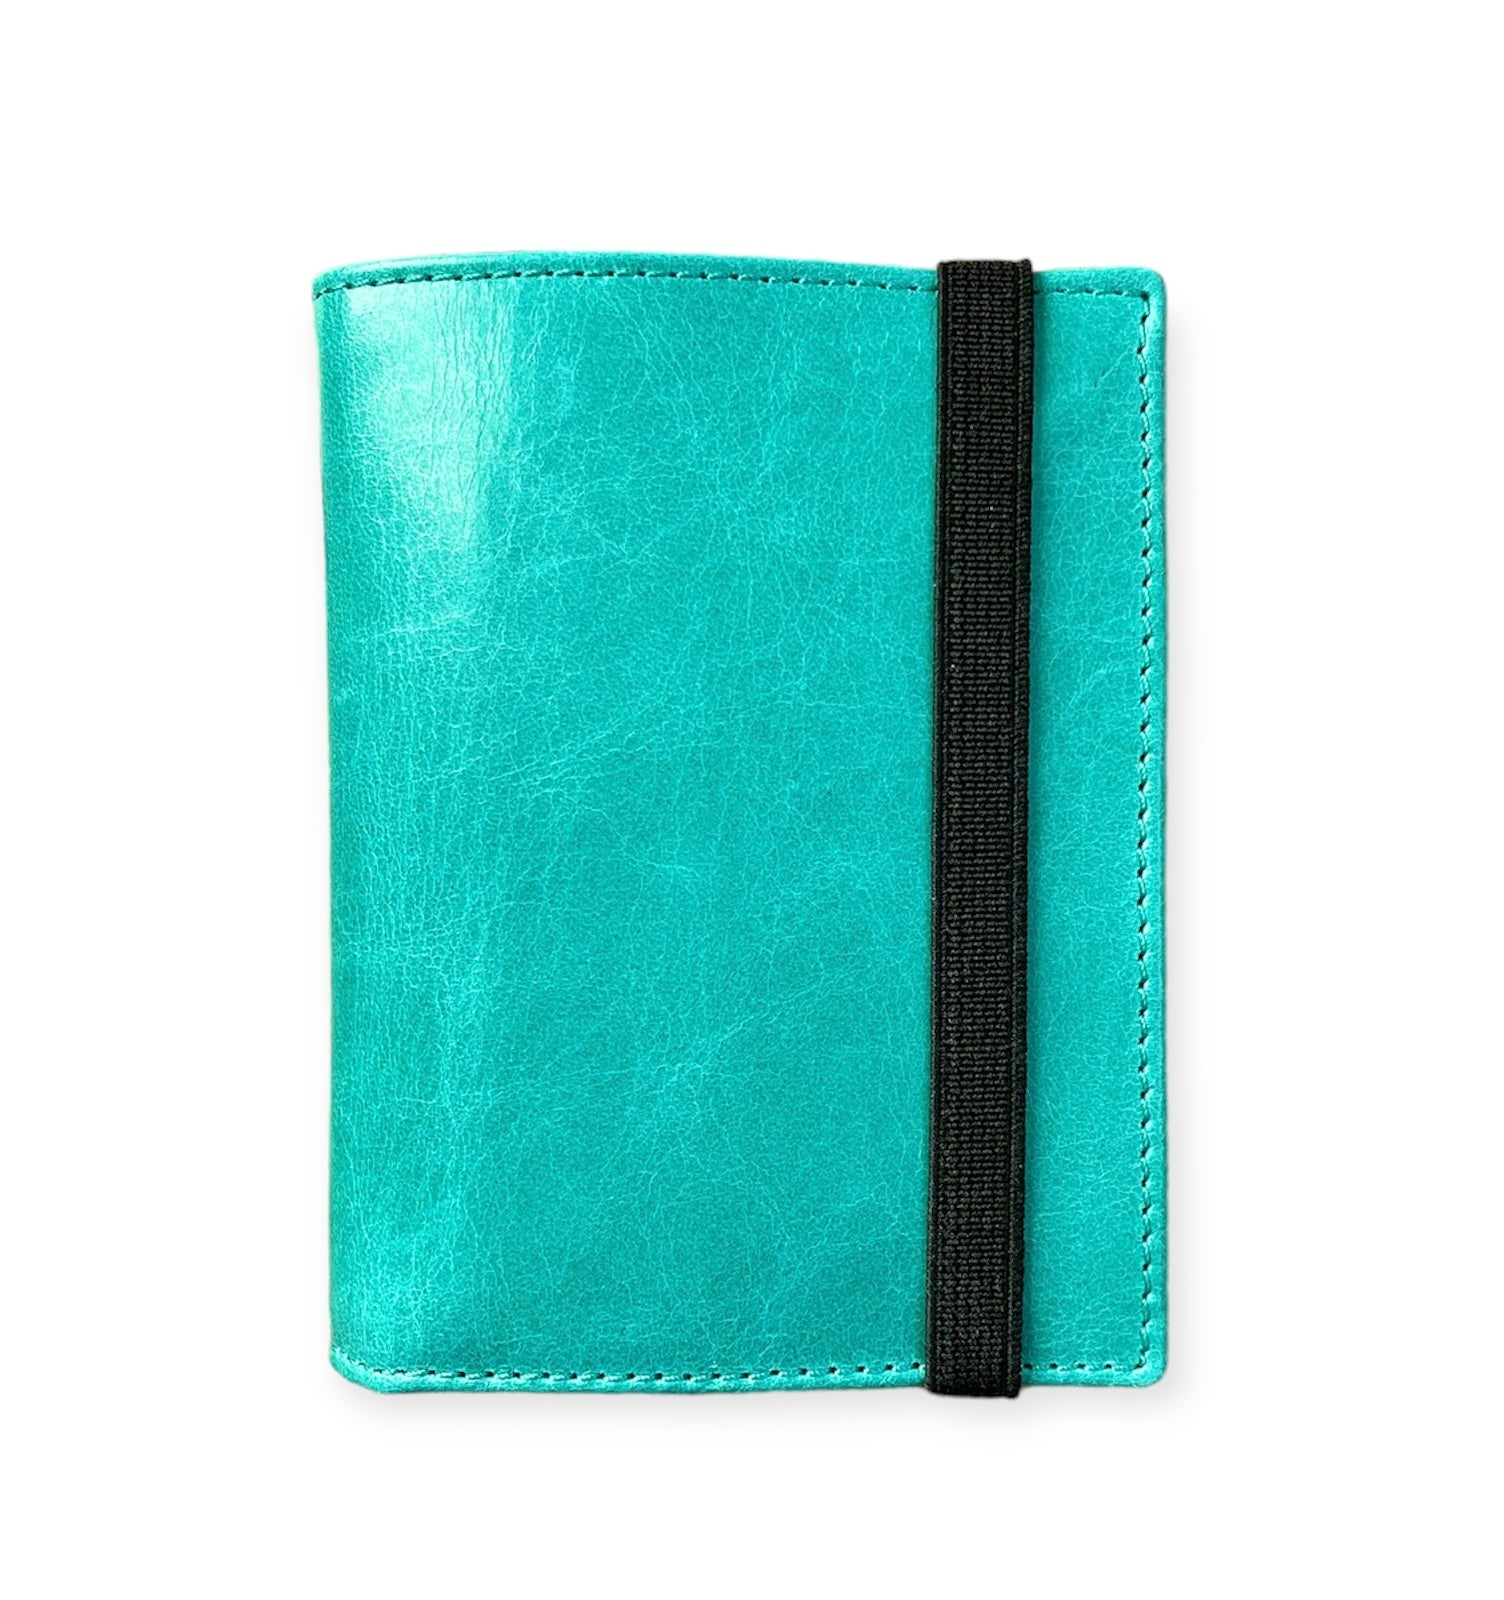 Small unisex wallet with coin pocket 720 classics Piedmont